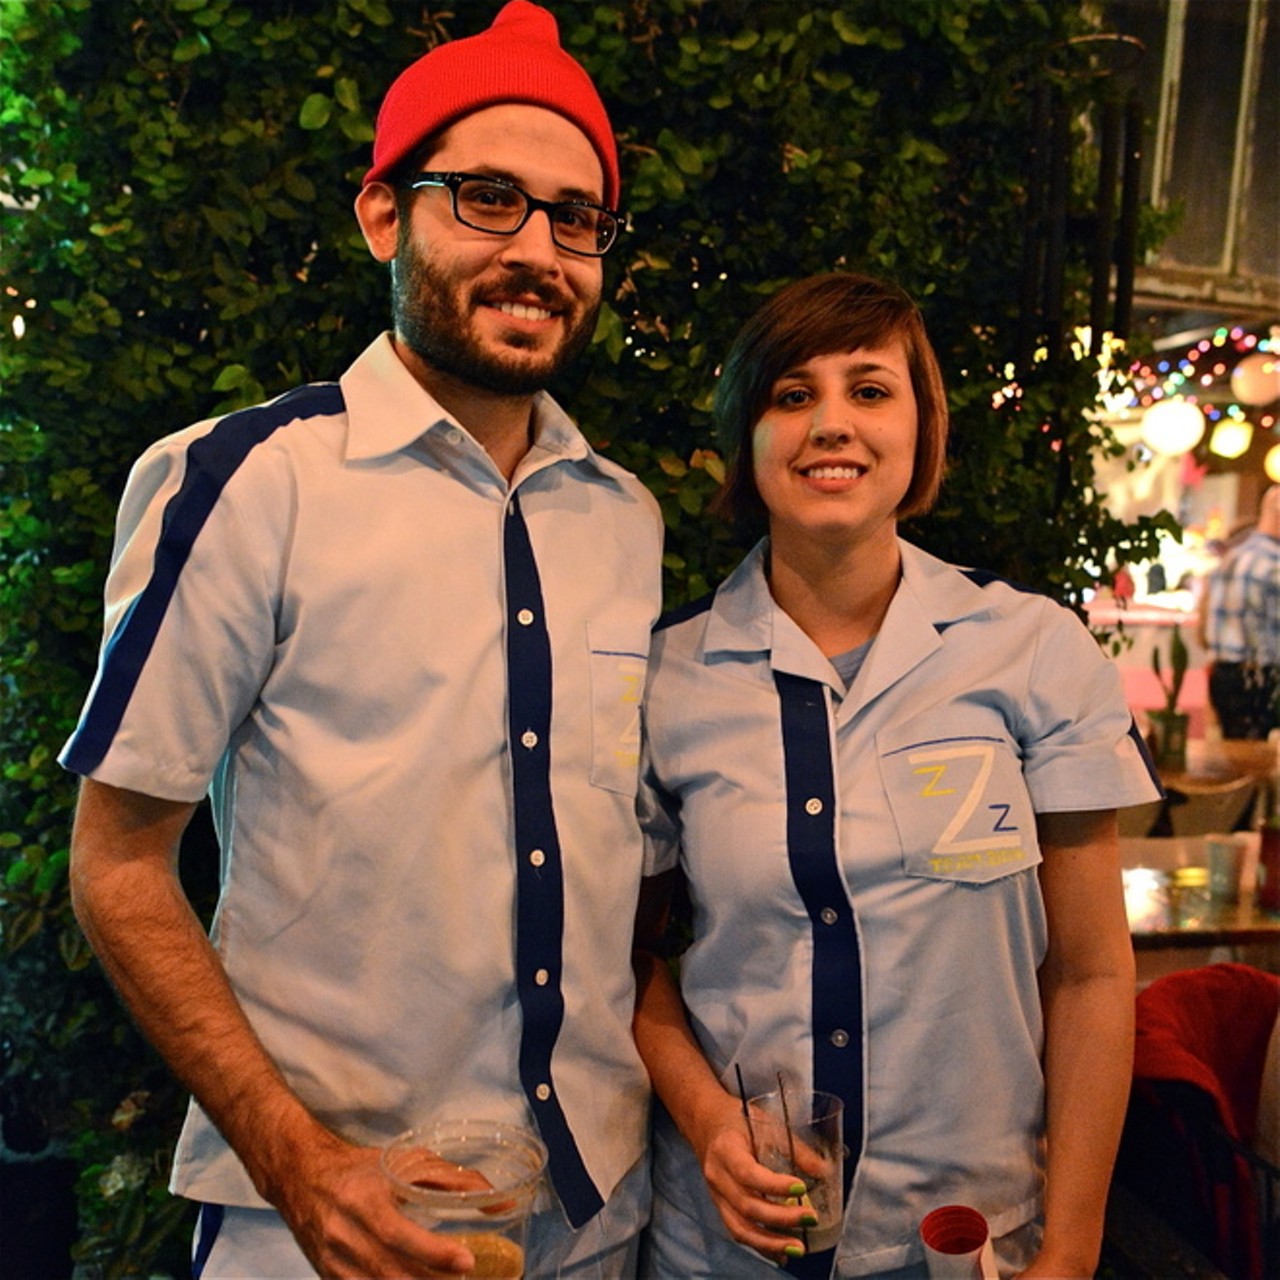 21 whimsical photos from the Wes Anderson Costume Party at Stardust Video & Coffee